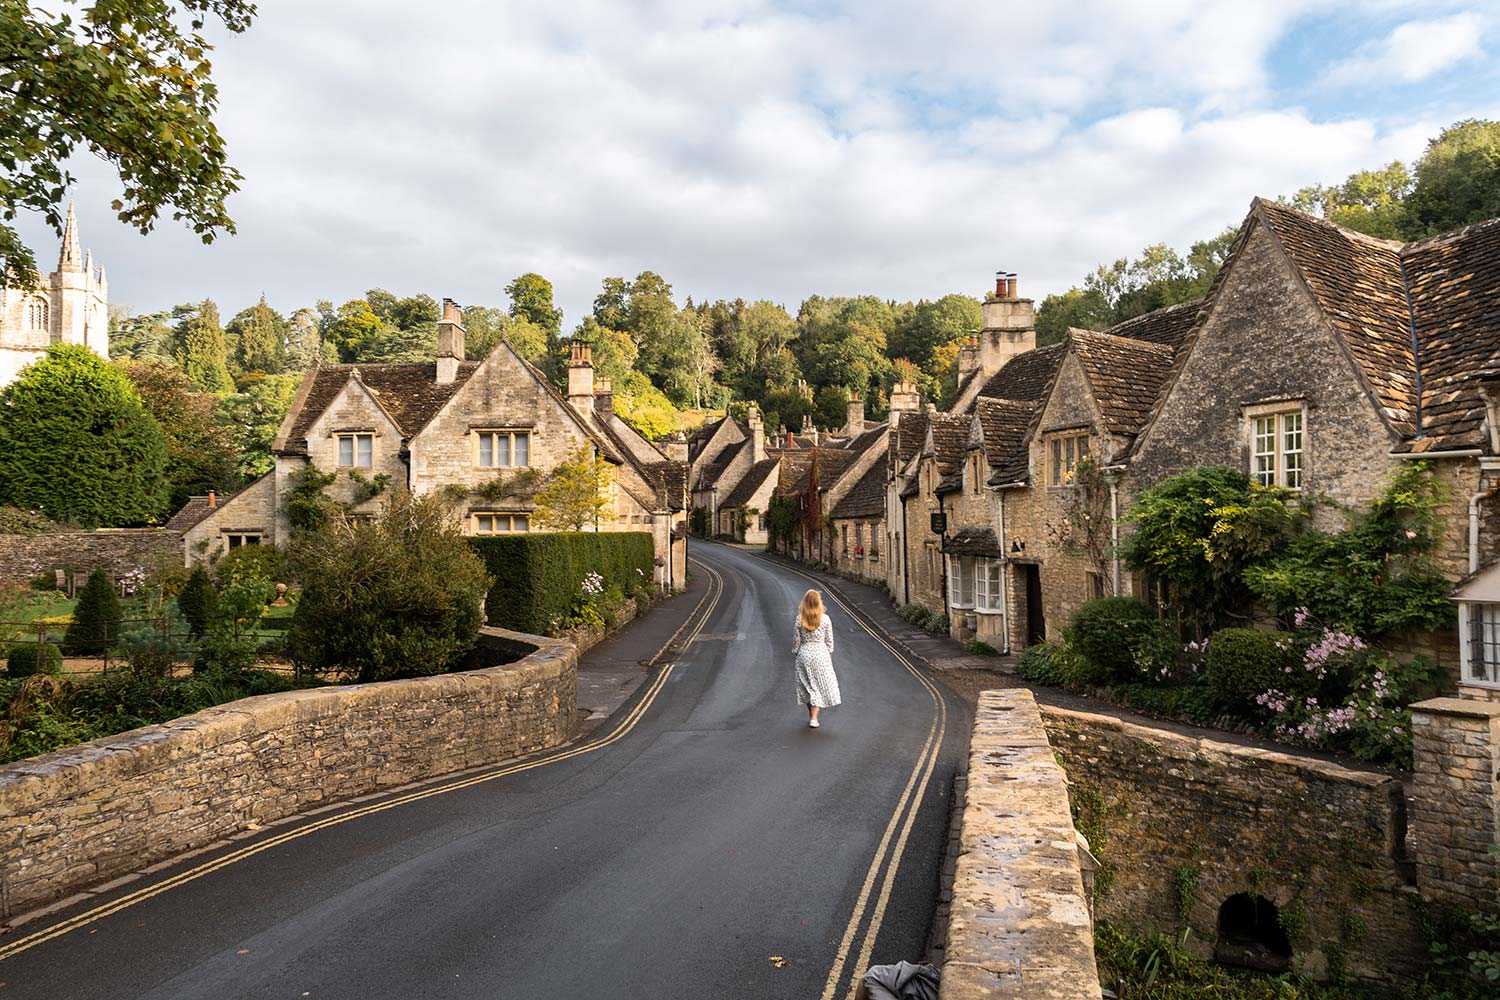 Castle Combe, Cotswolds, Angleterre, Royaume-Uni / Castle Combe, Cotswolds, England, UK